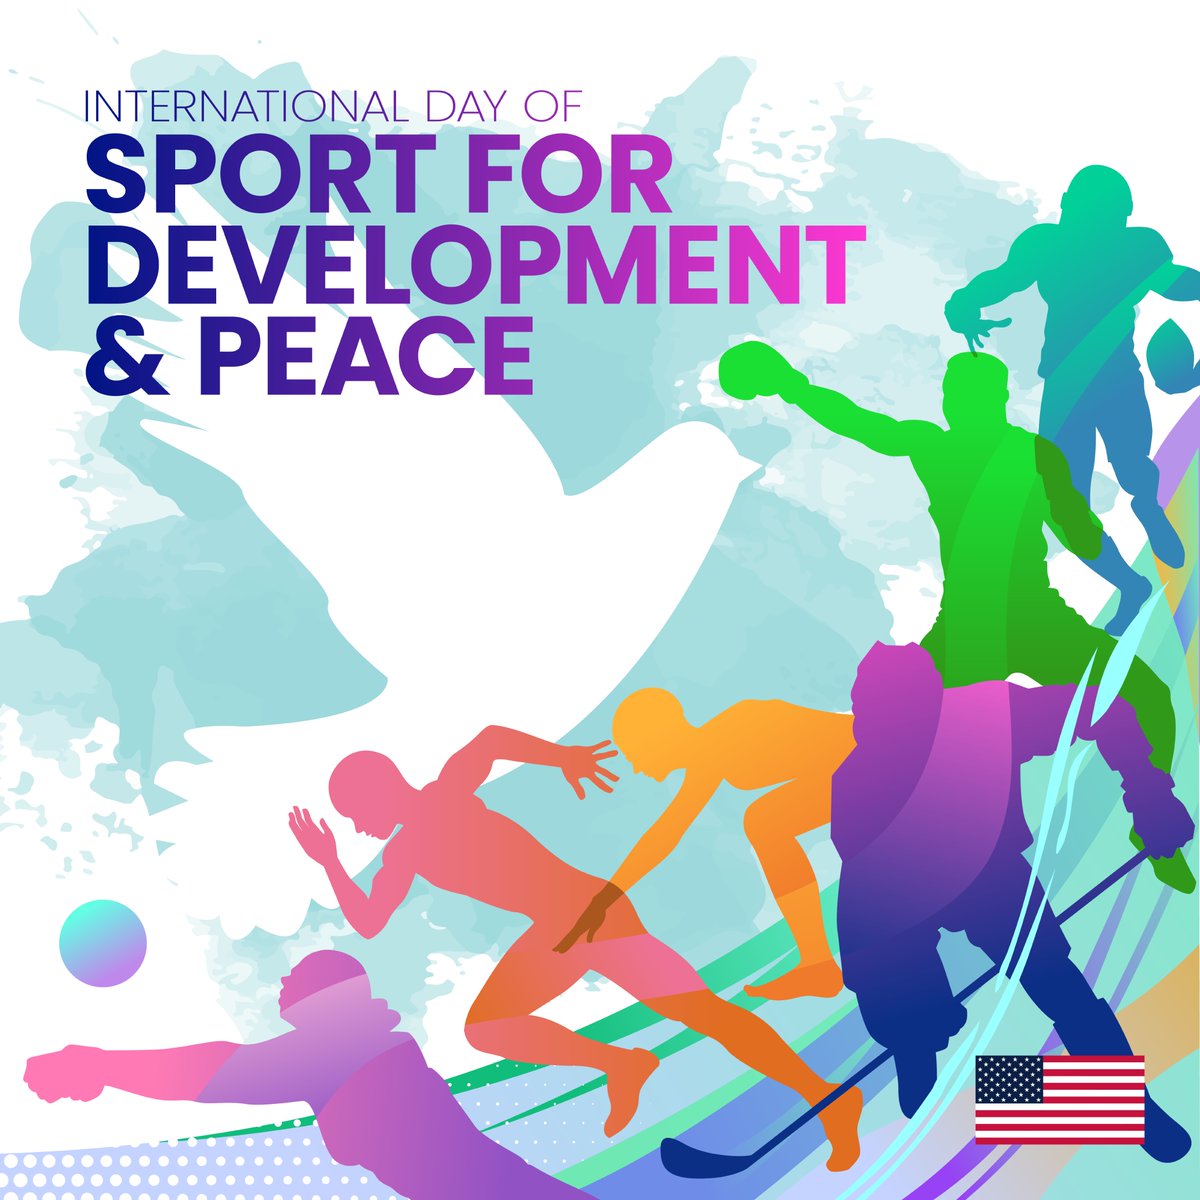 Today is International Day of Sport for Development and Peace! @StateDept is committed to using sports as a tool for positive change. From promoting teamwork and cooperation through #sportsdiplomacy efforts to bridging cultural divides, sports have the power to unite us all.